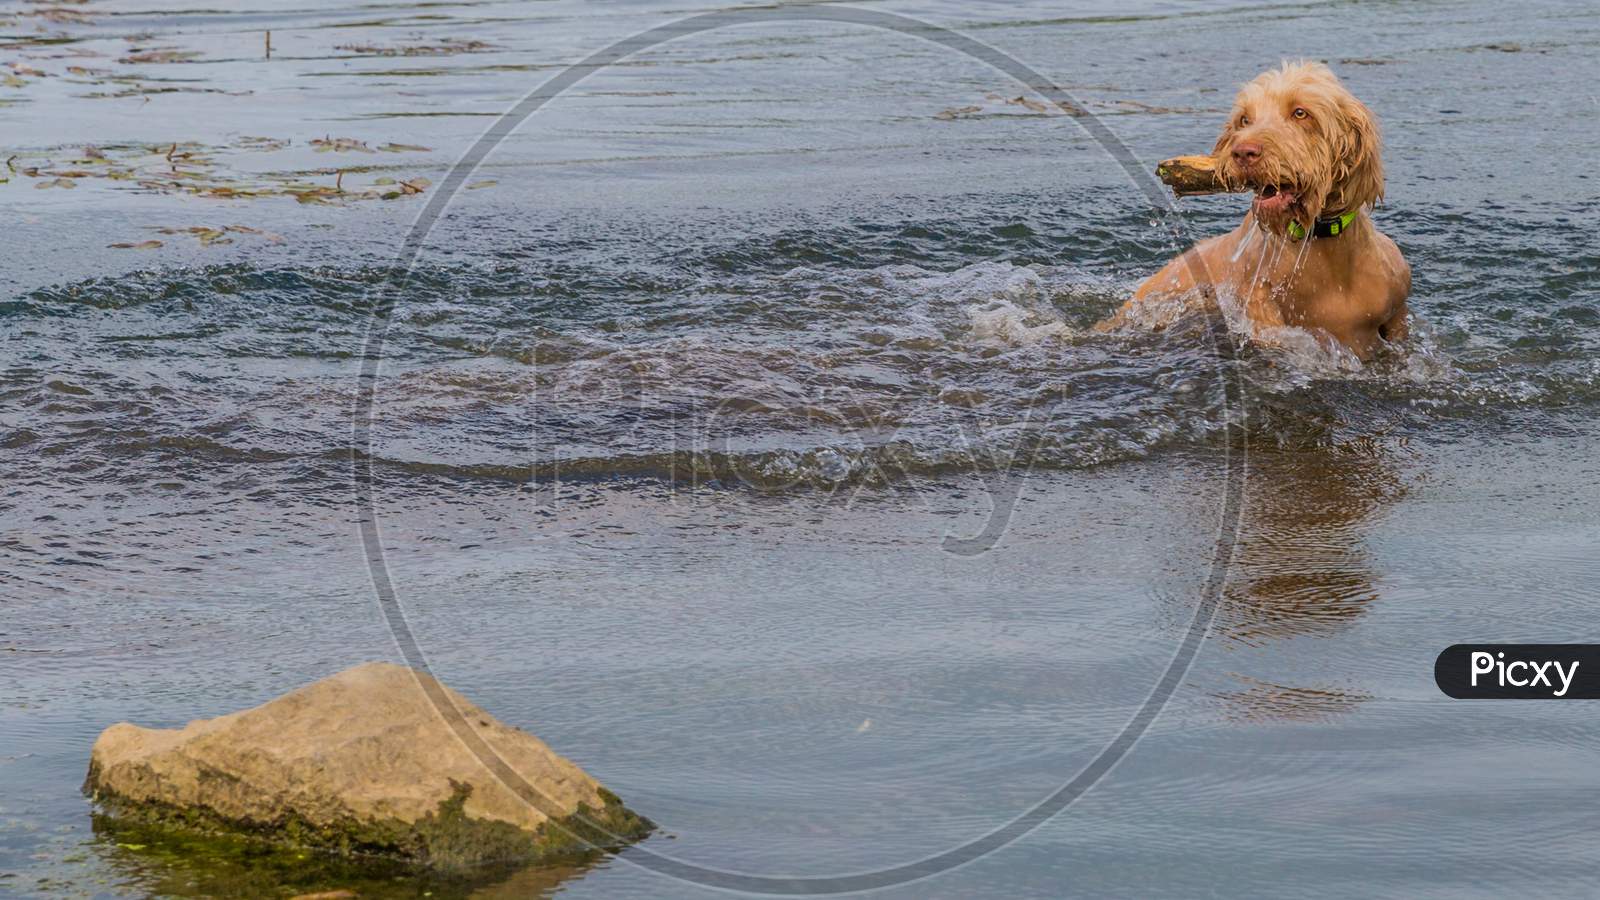 Beautiful Wirehaired Vizsla Dog Playing In The River With A Piece Of Wood In Its Snout